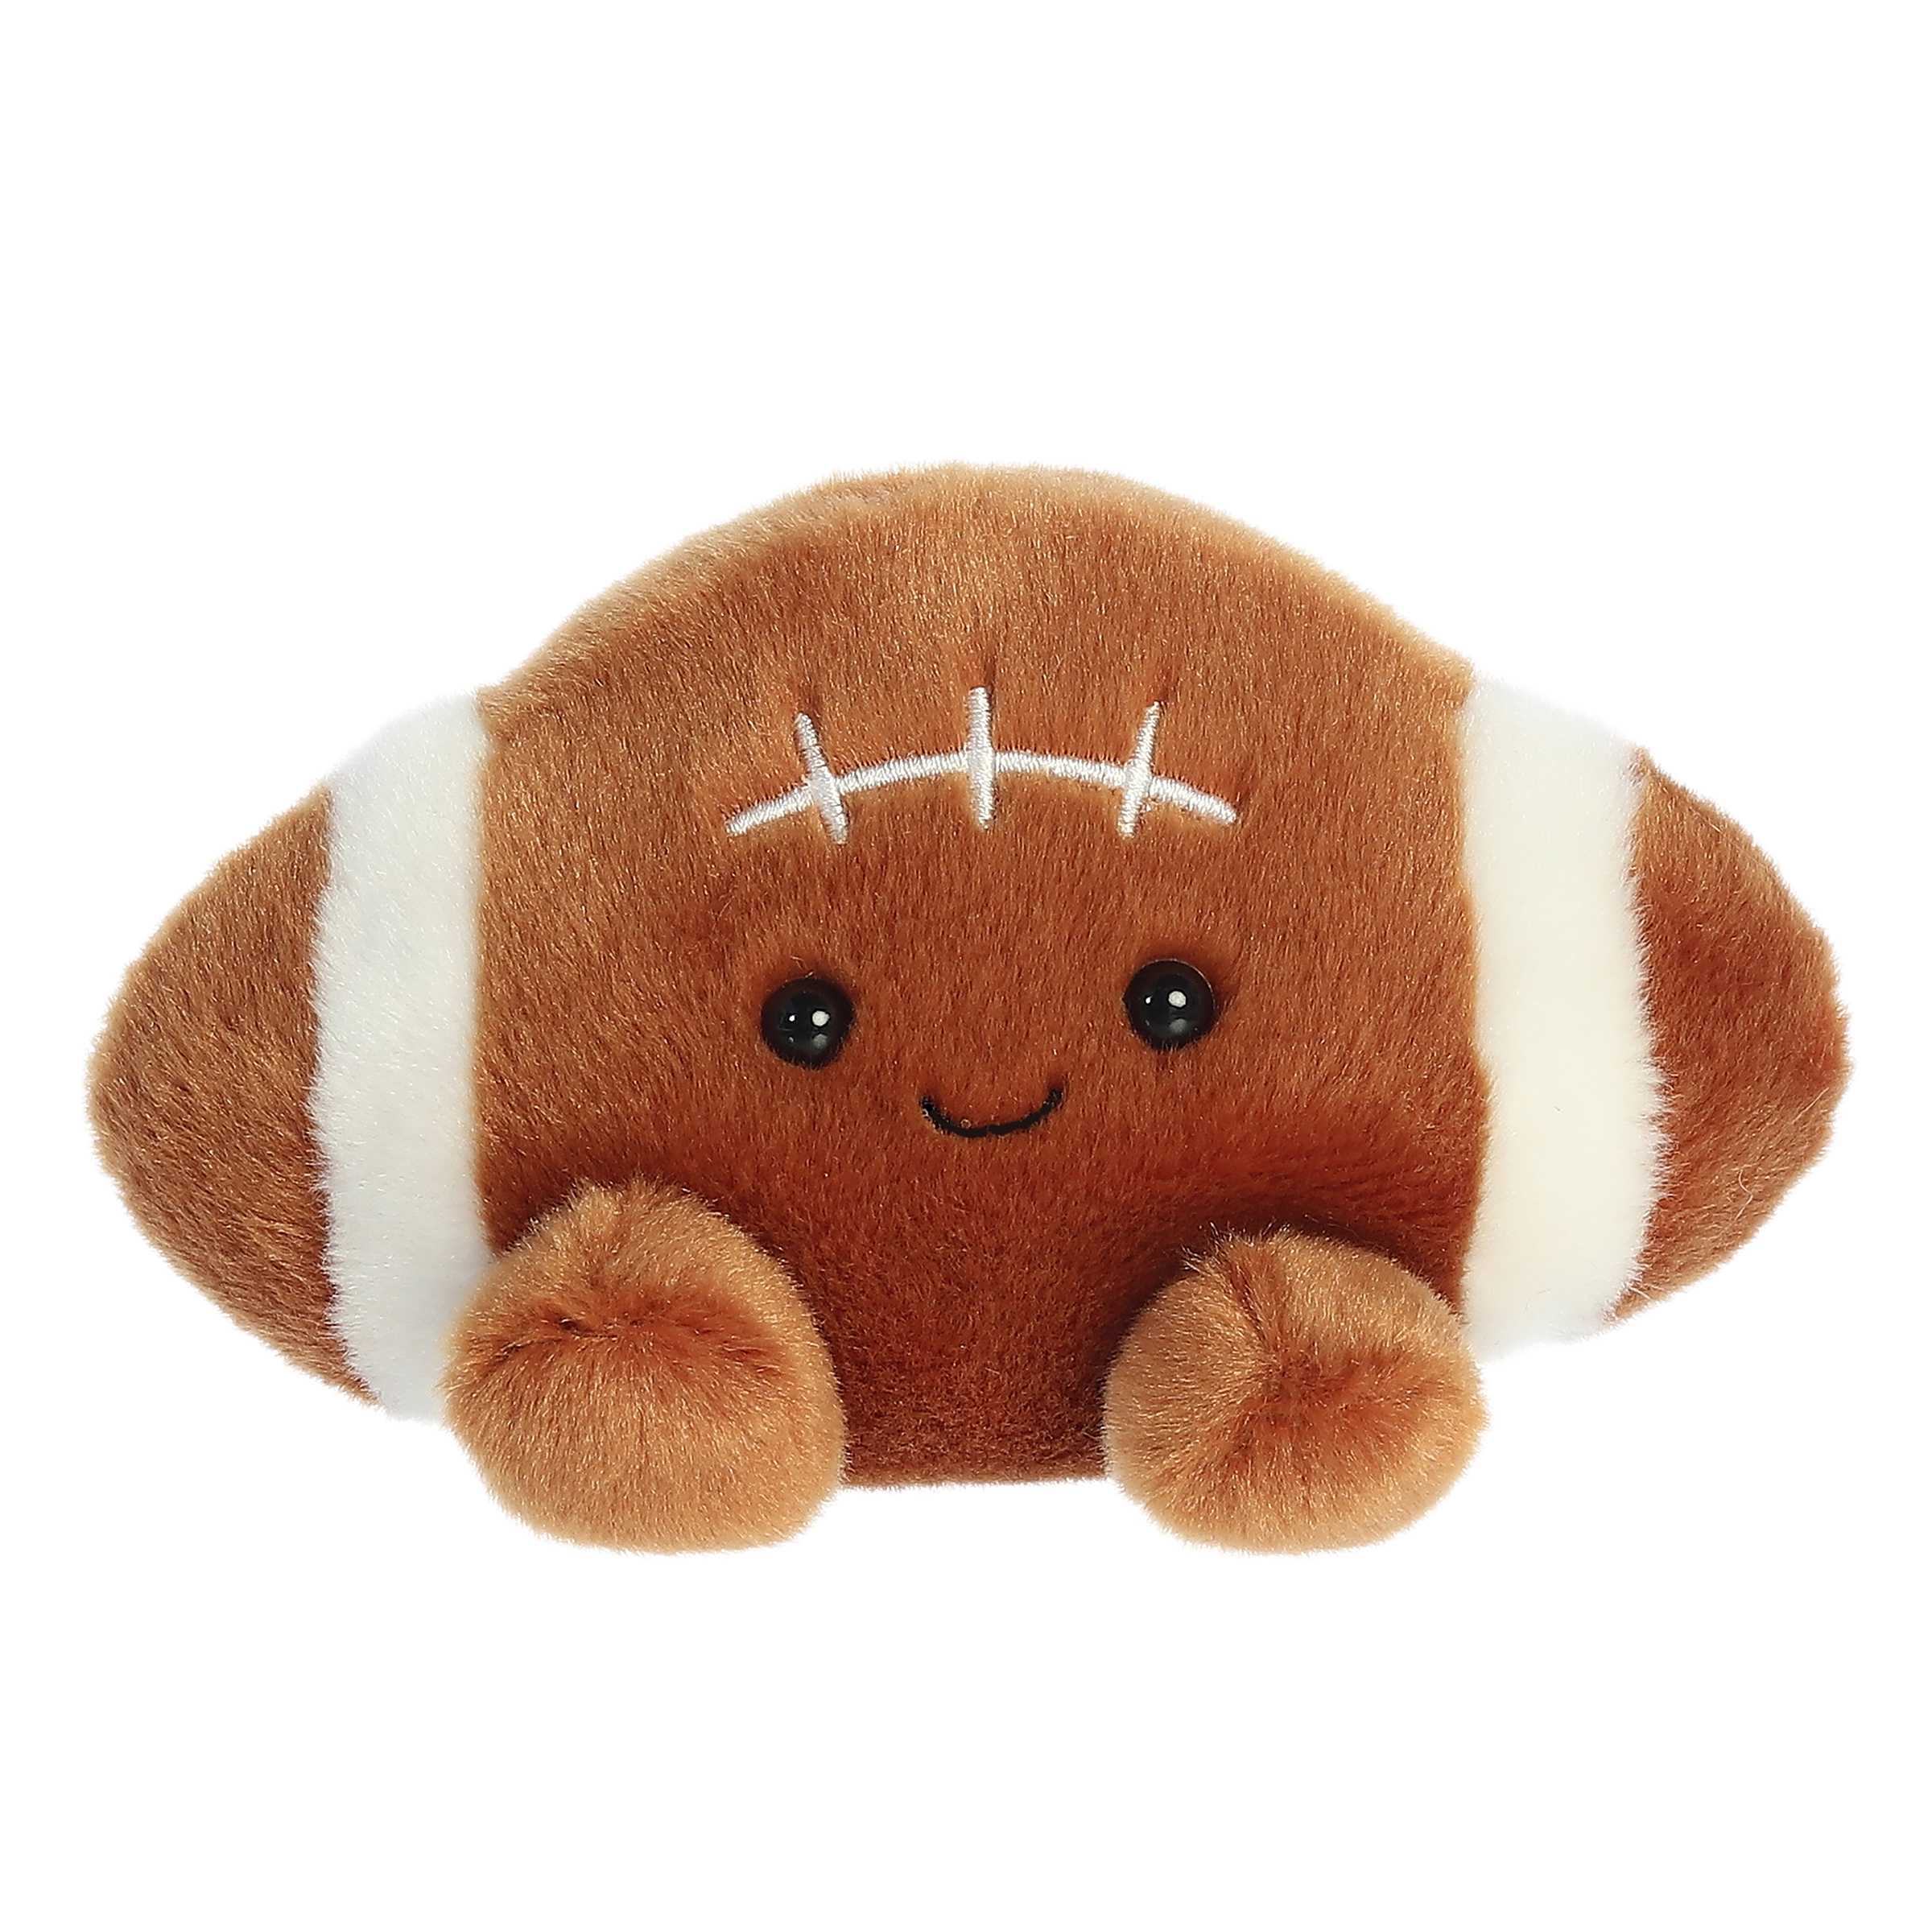 Tackle football plush has a fuzzy brown and white exterior that mimics a football's design with stitched white lace!